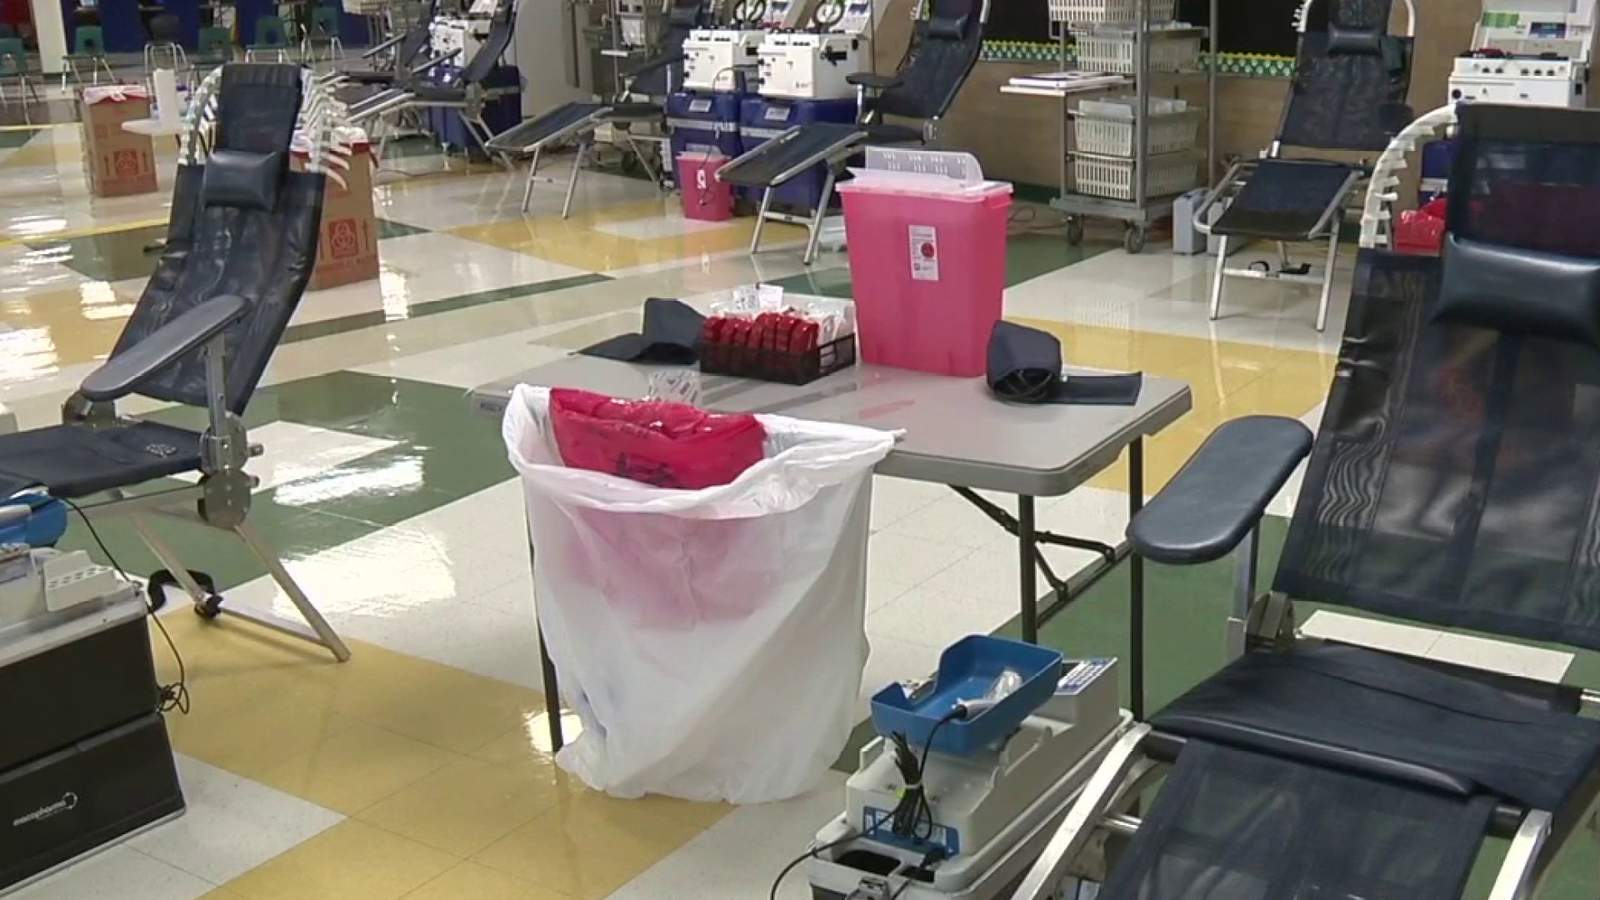 Many donors a ‘no show’ for blood drive held at Holmes High School